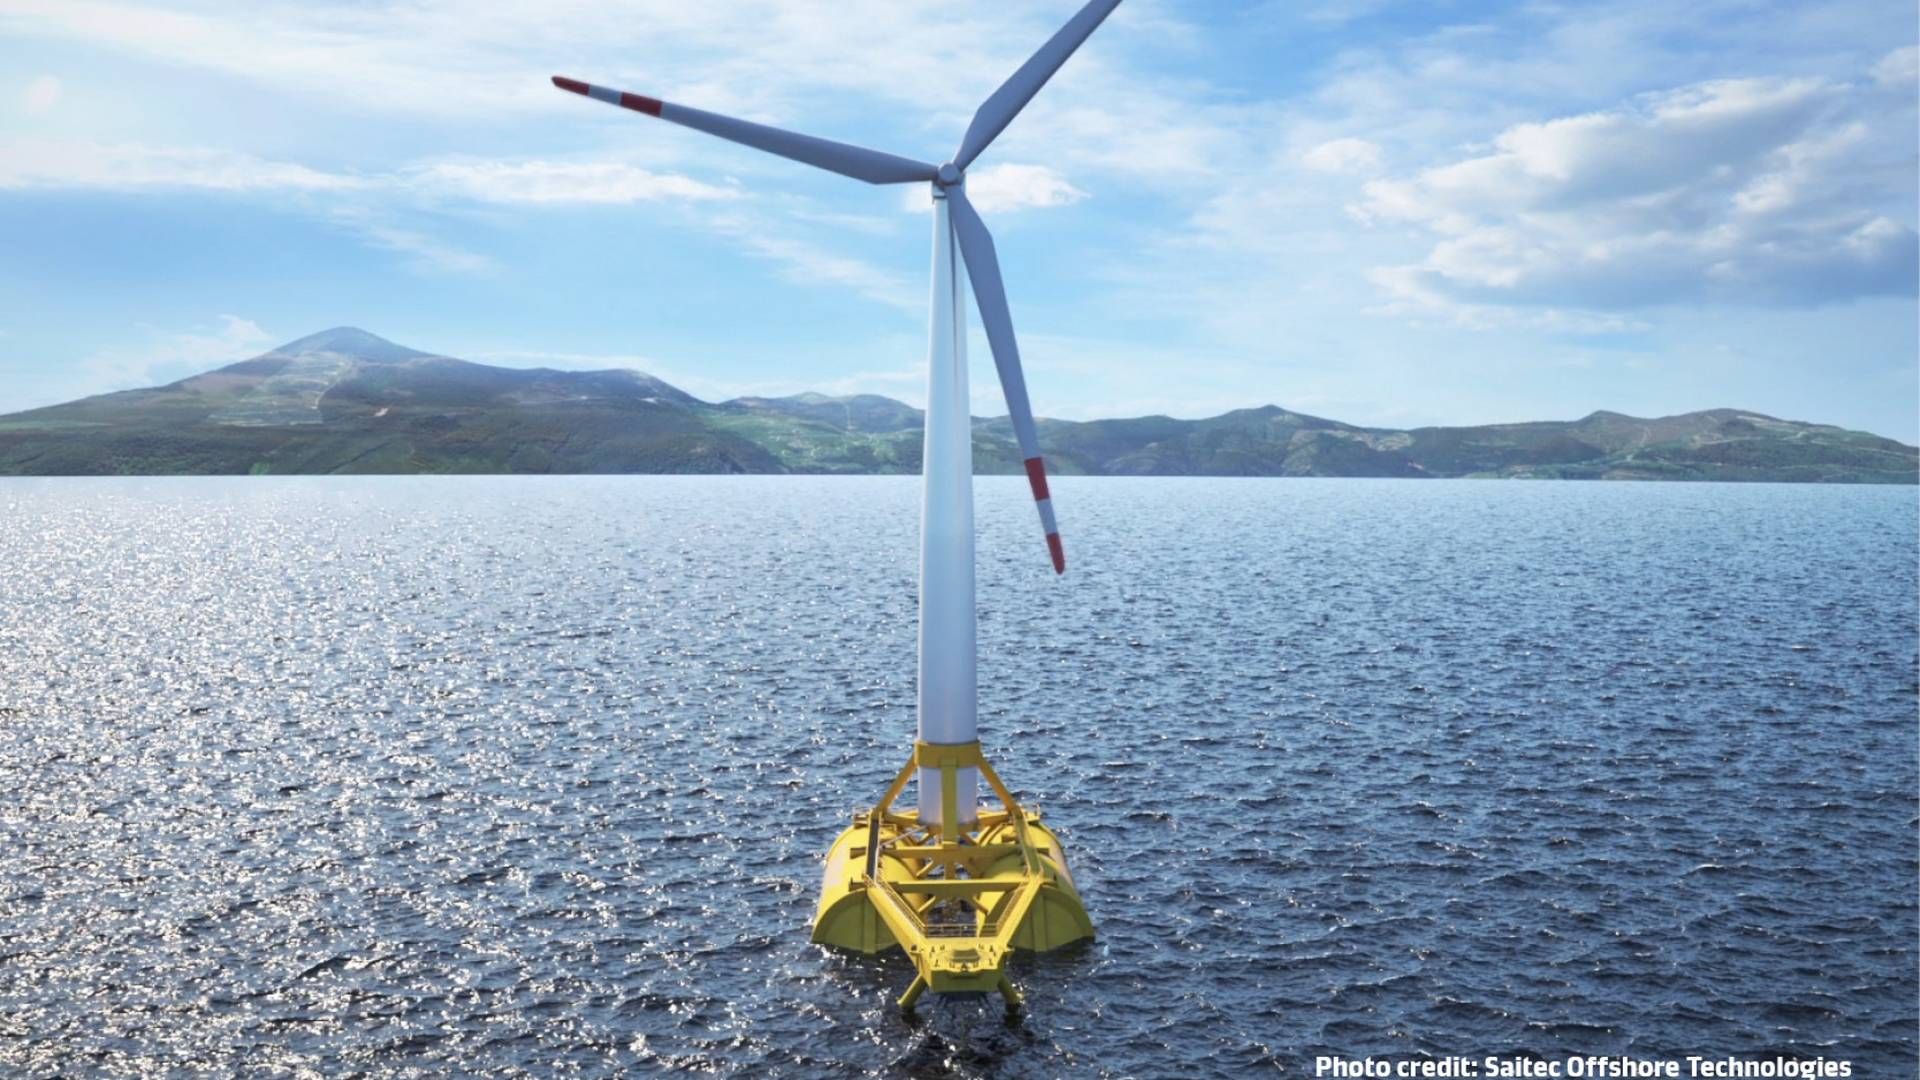 Corio Generation and new partner Q-Energy vie for market share in Spanish floating wind. | Photo: Saitec Offshore Technologies